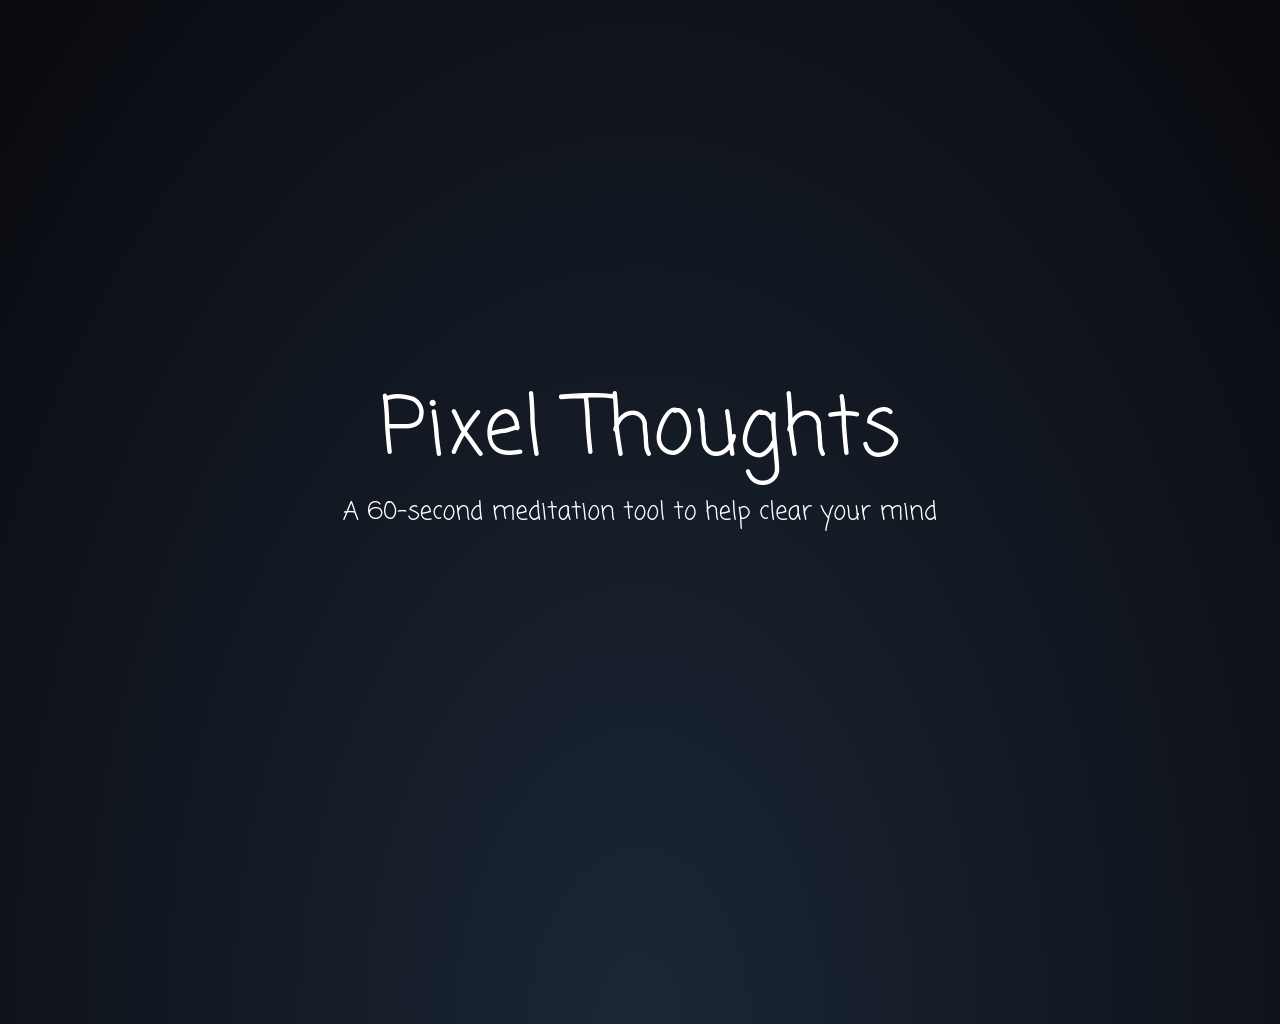 pixelthoughts.co